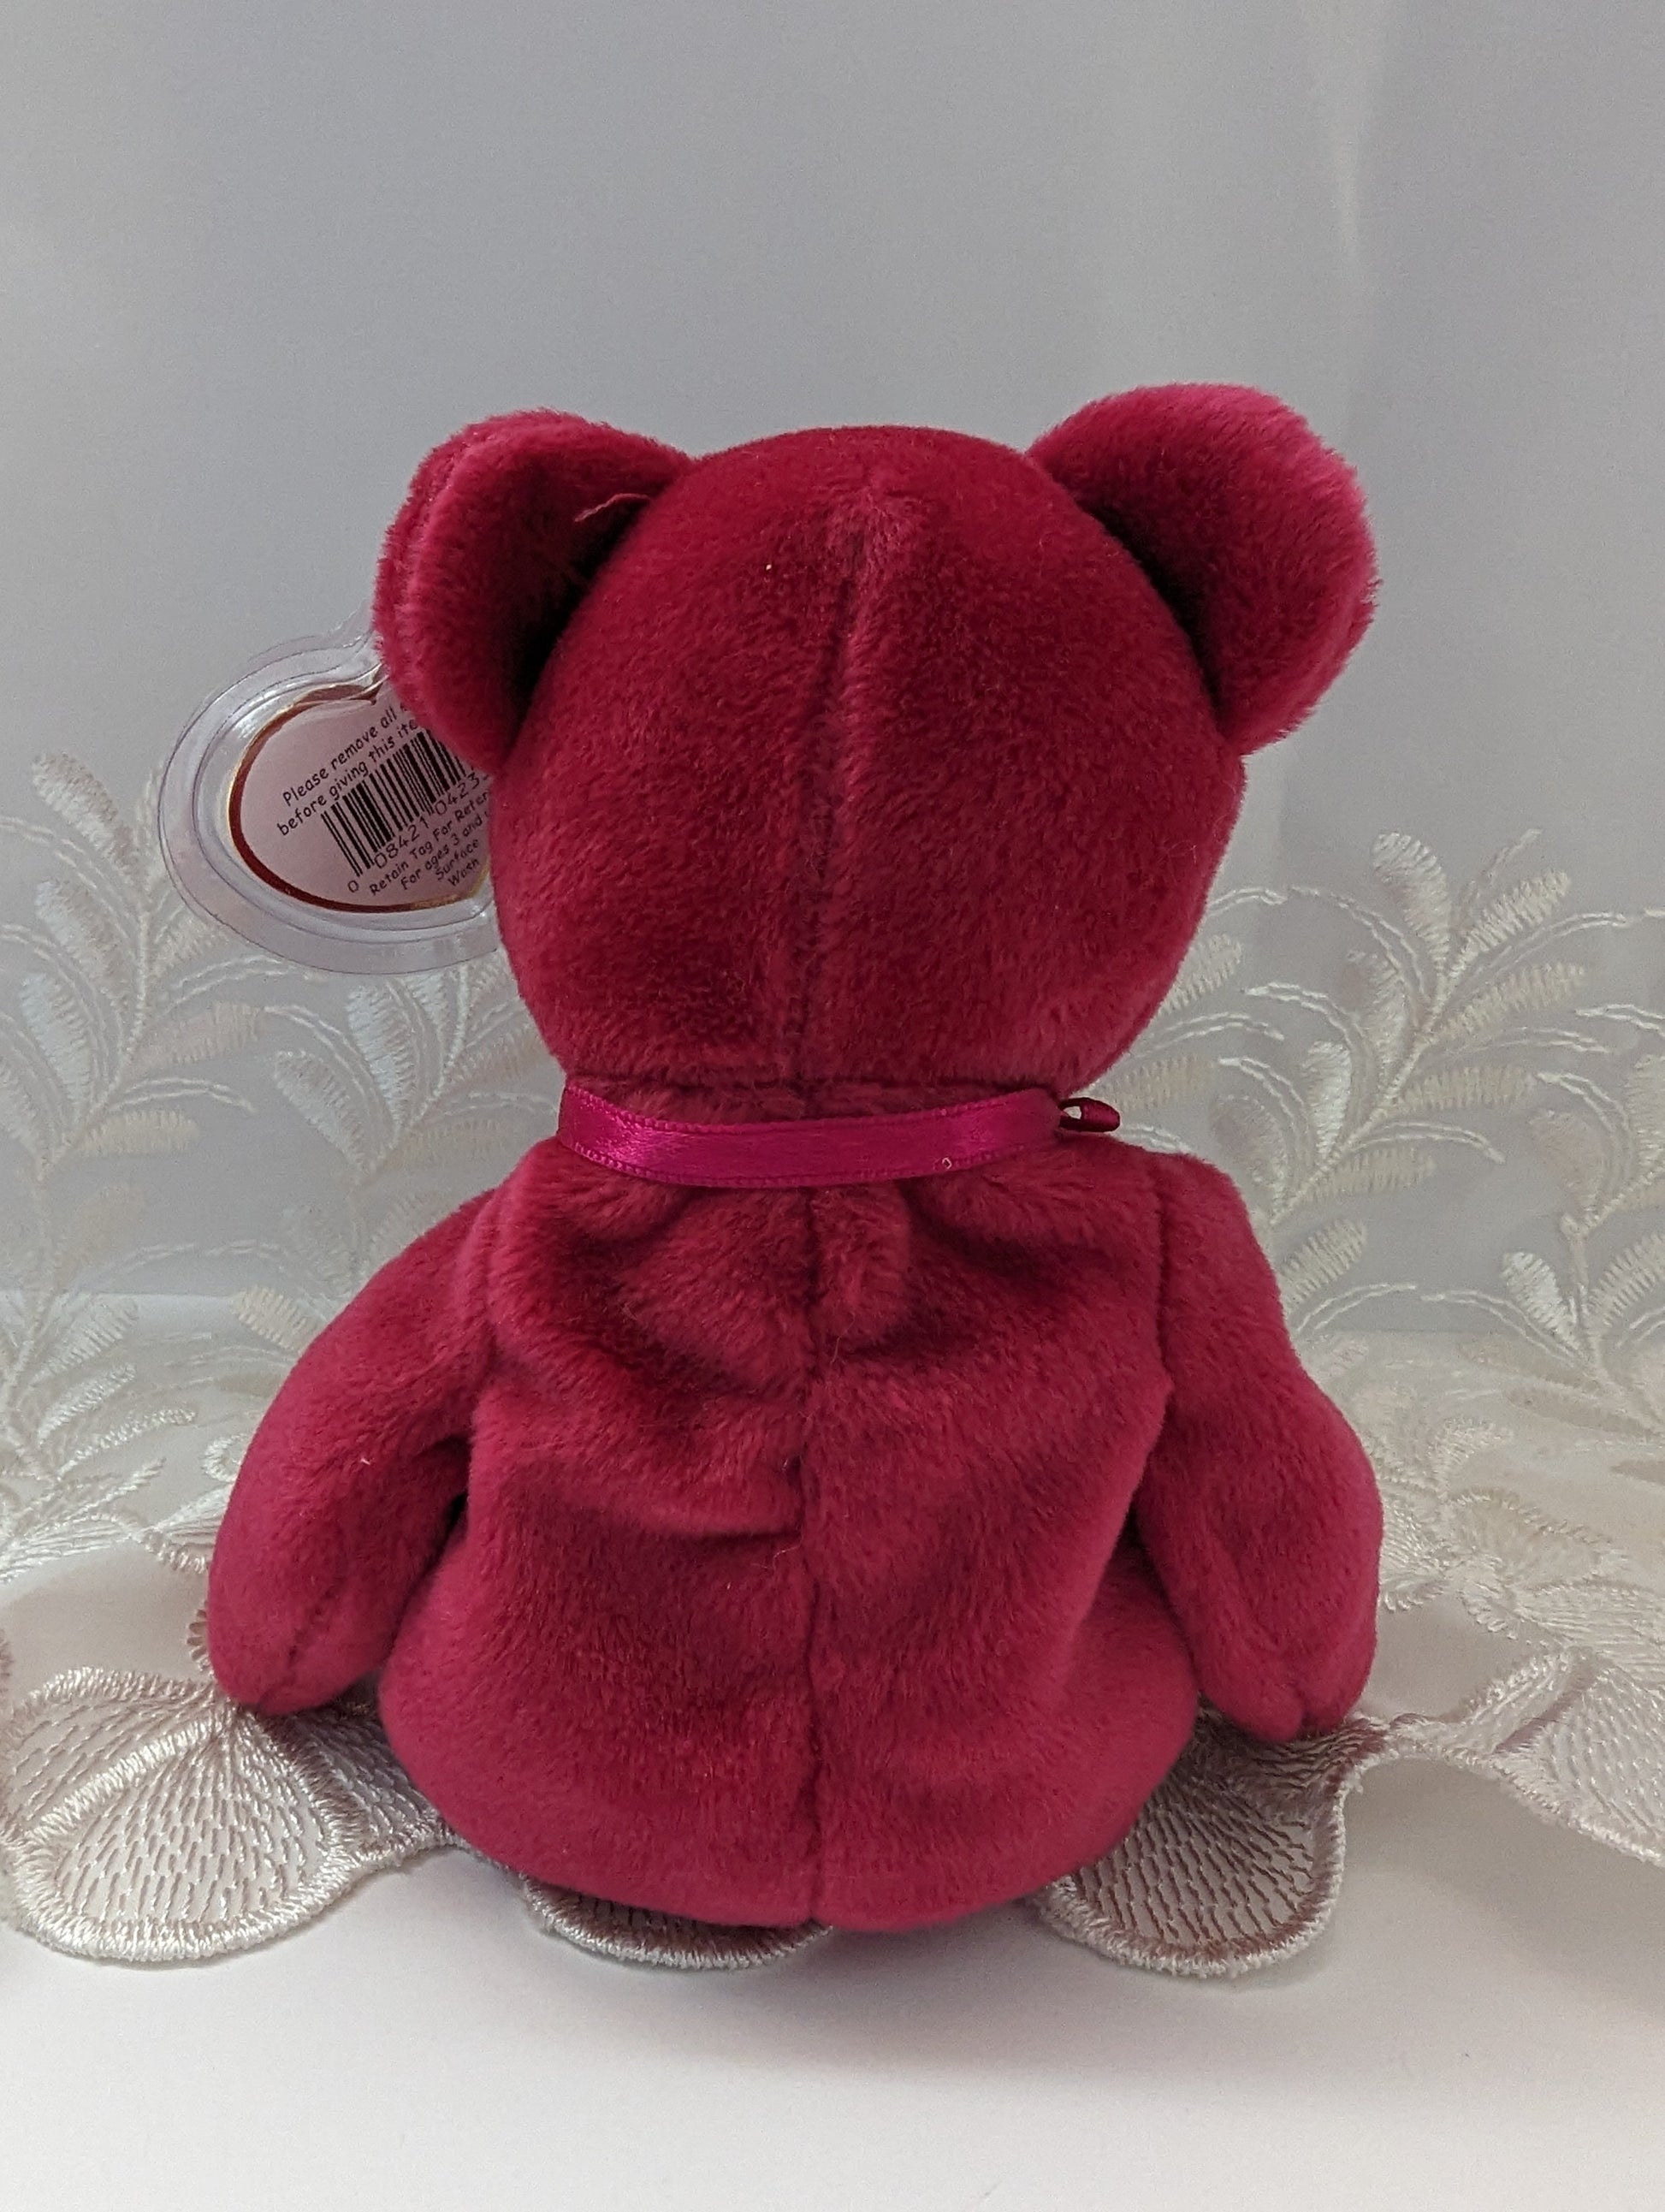 Ty Beanie Baby - Valentina The Bear (8.5in) - Vintage Beanies Canada